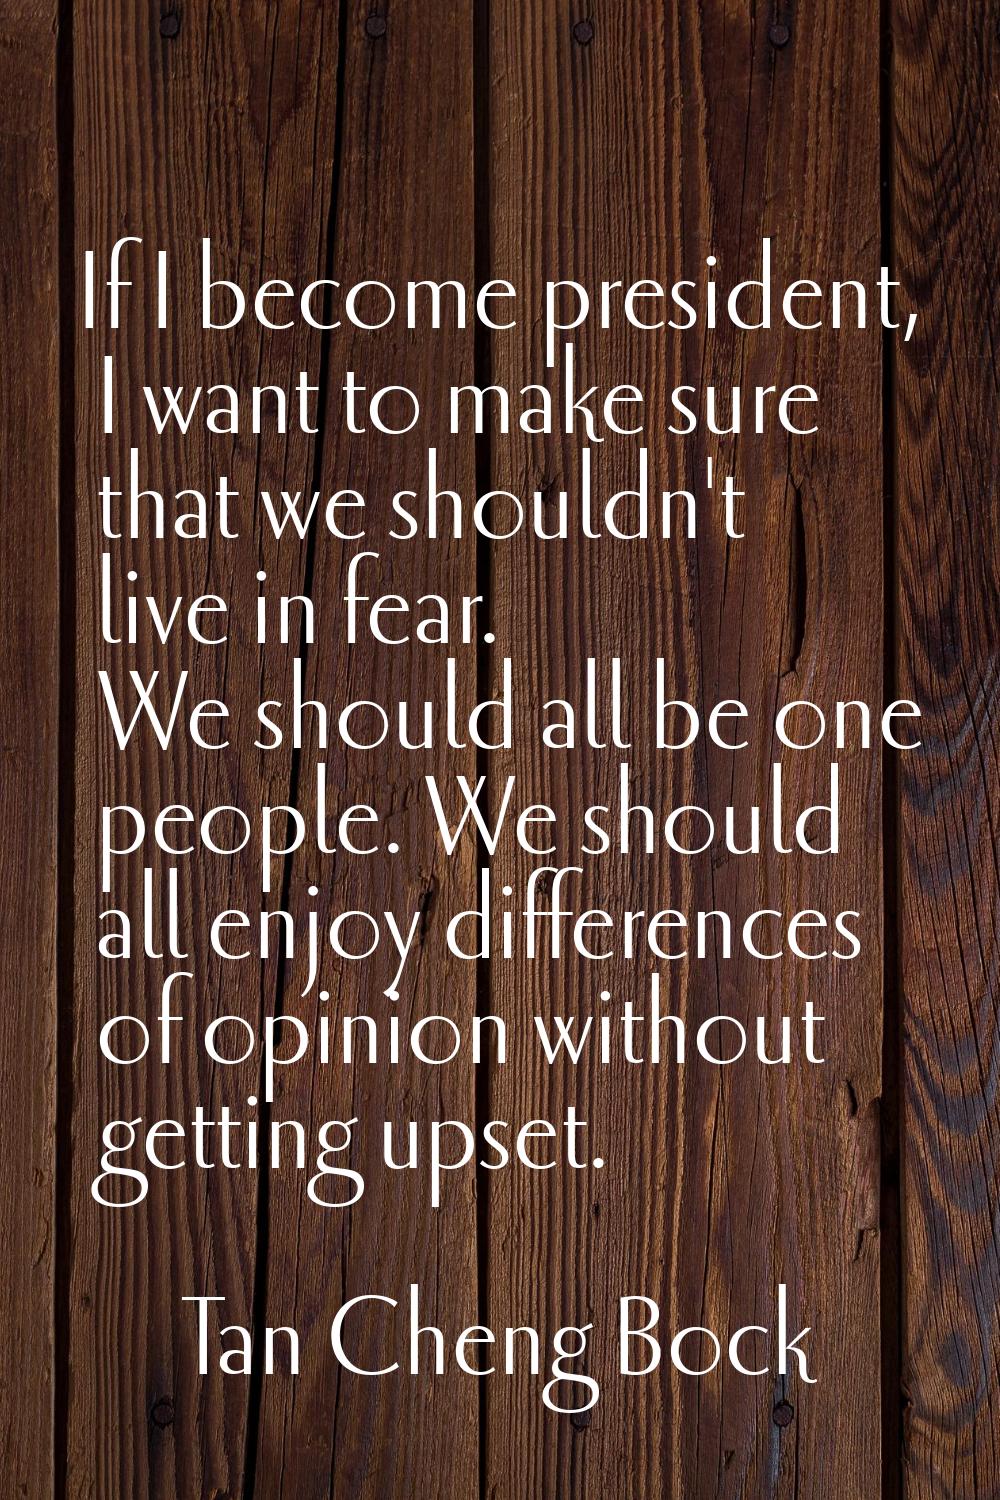 If I become president, I want to make sure that we shouldn't live in fear. We should all be one peo